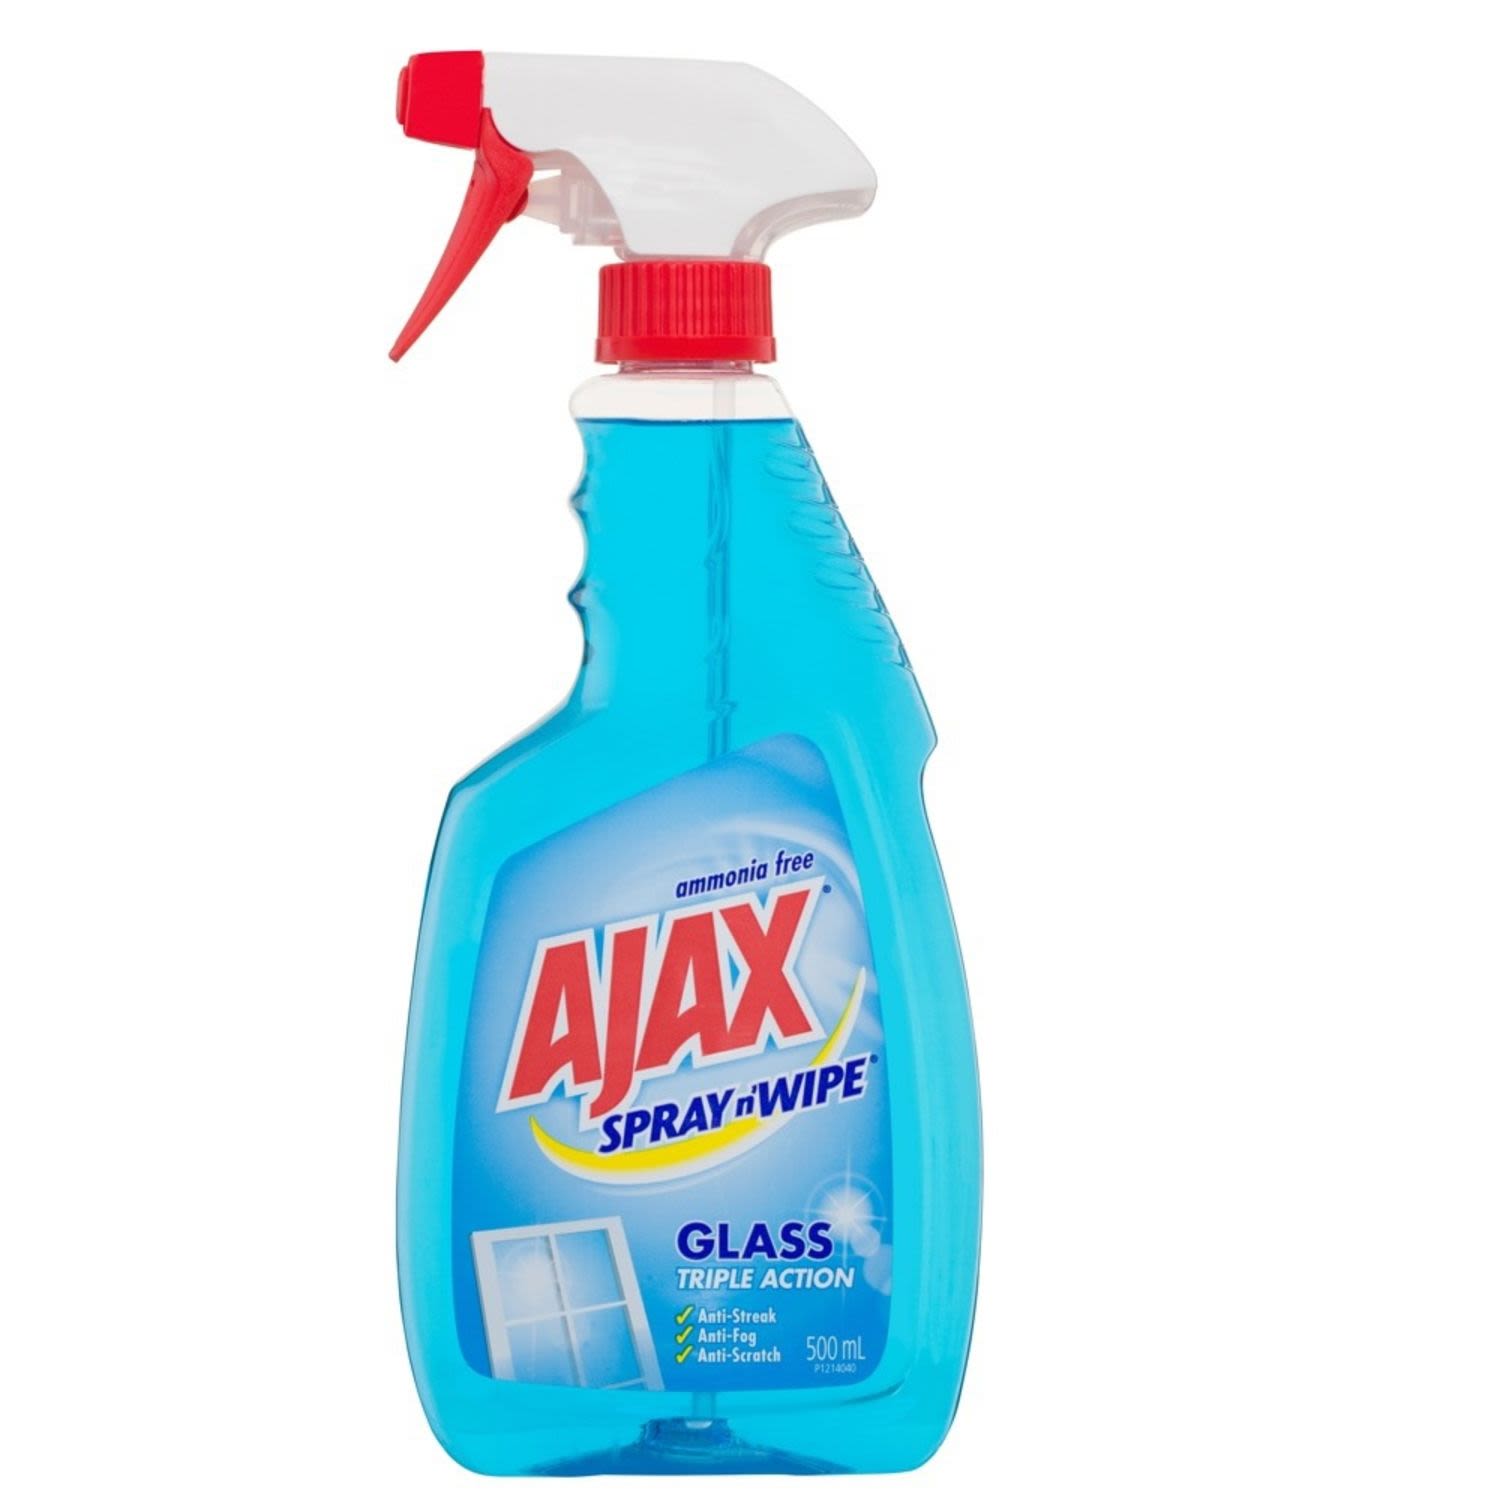 Ajax Spray n' Wipe Glass Cleaner Trigger Ammonia Free Surface Spray Triple Action Made in Australia Recycled Bottle, 500 Millilitre